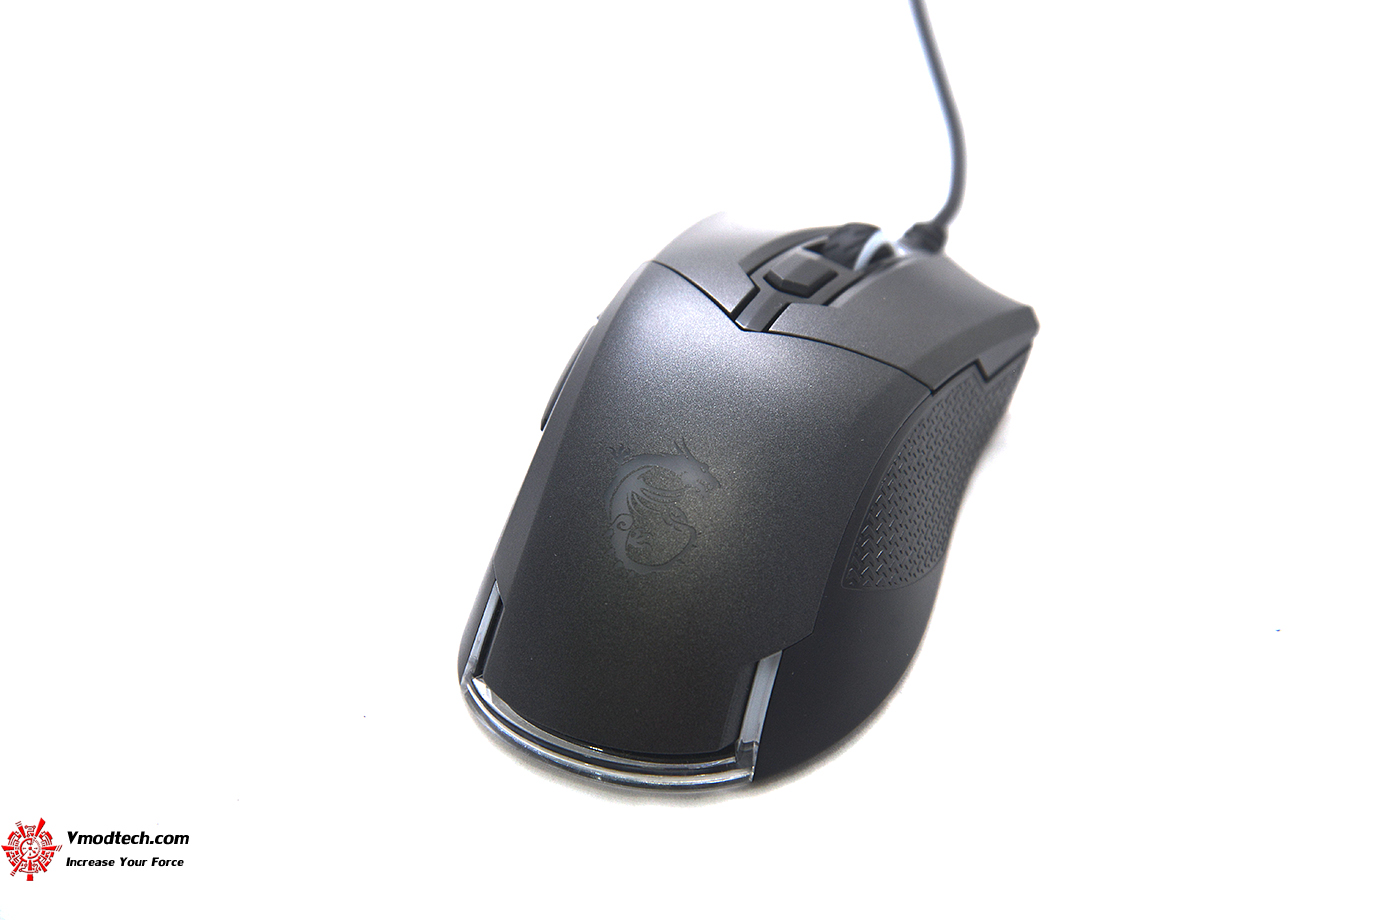 dsc 4905 MSI CLUTCH GM50 GAMING MOUSE REVIEW